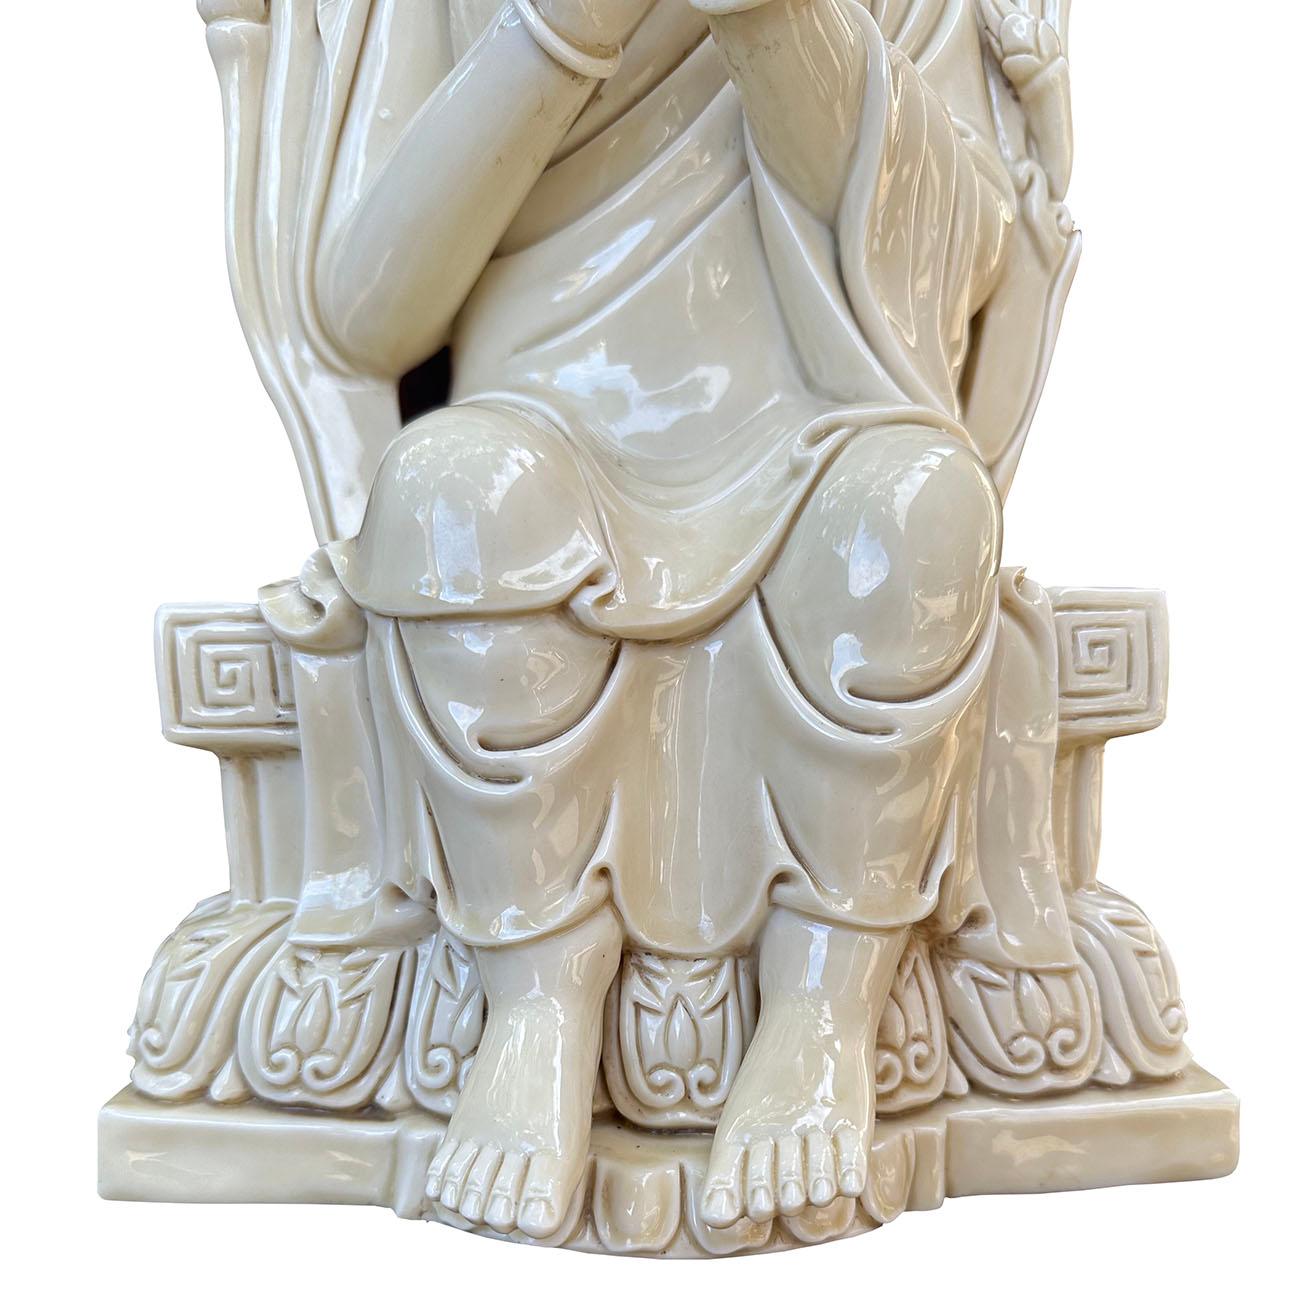 Chinese Export Chinese Antique De Hua Porcelain Kwan Yin Statuary For Sale